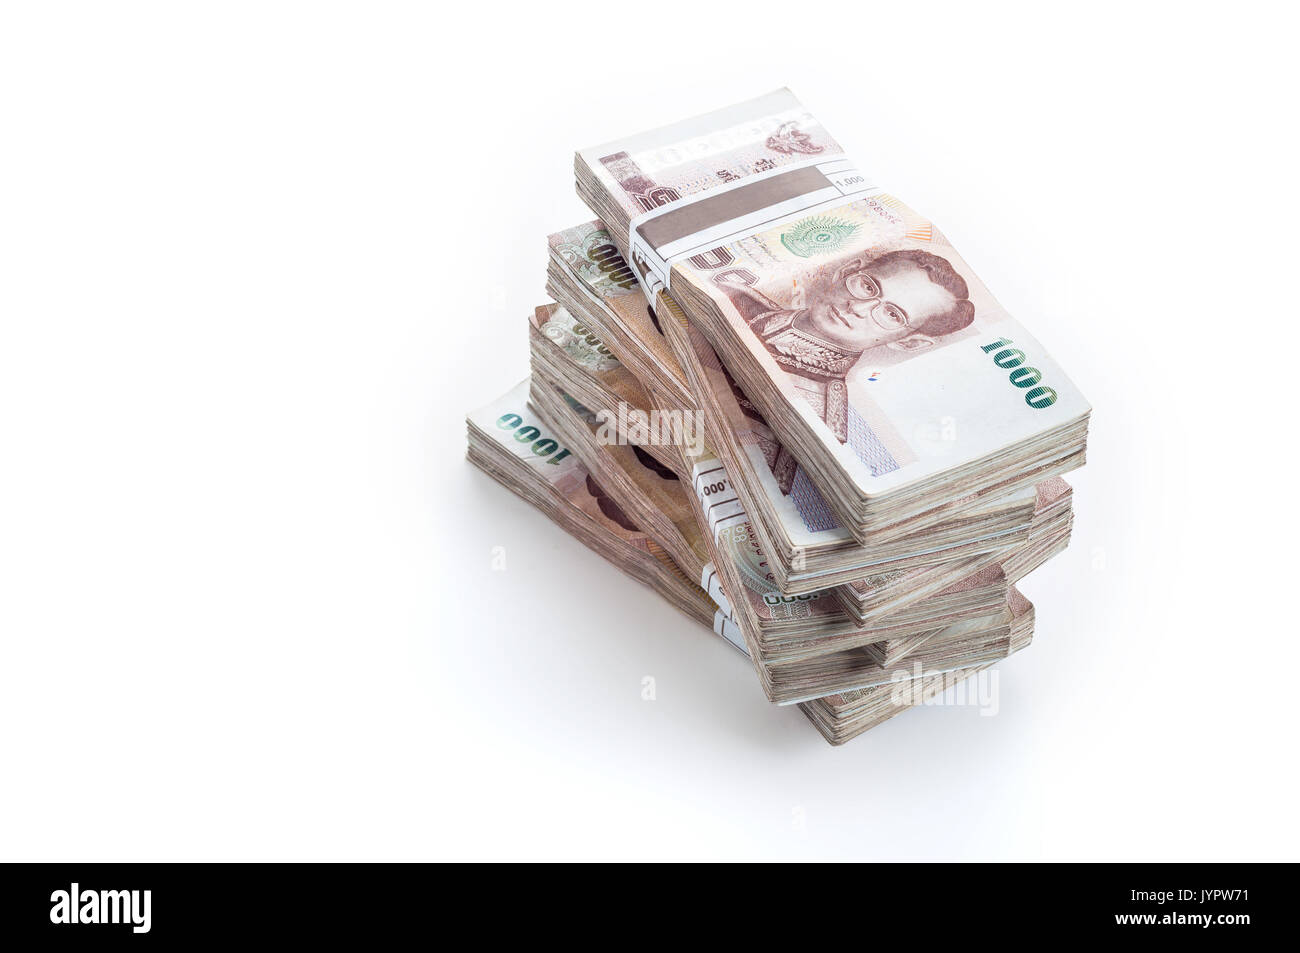 Few pack of thailand money banknotes on white background Stock Photo